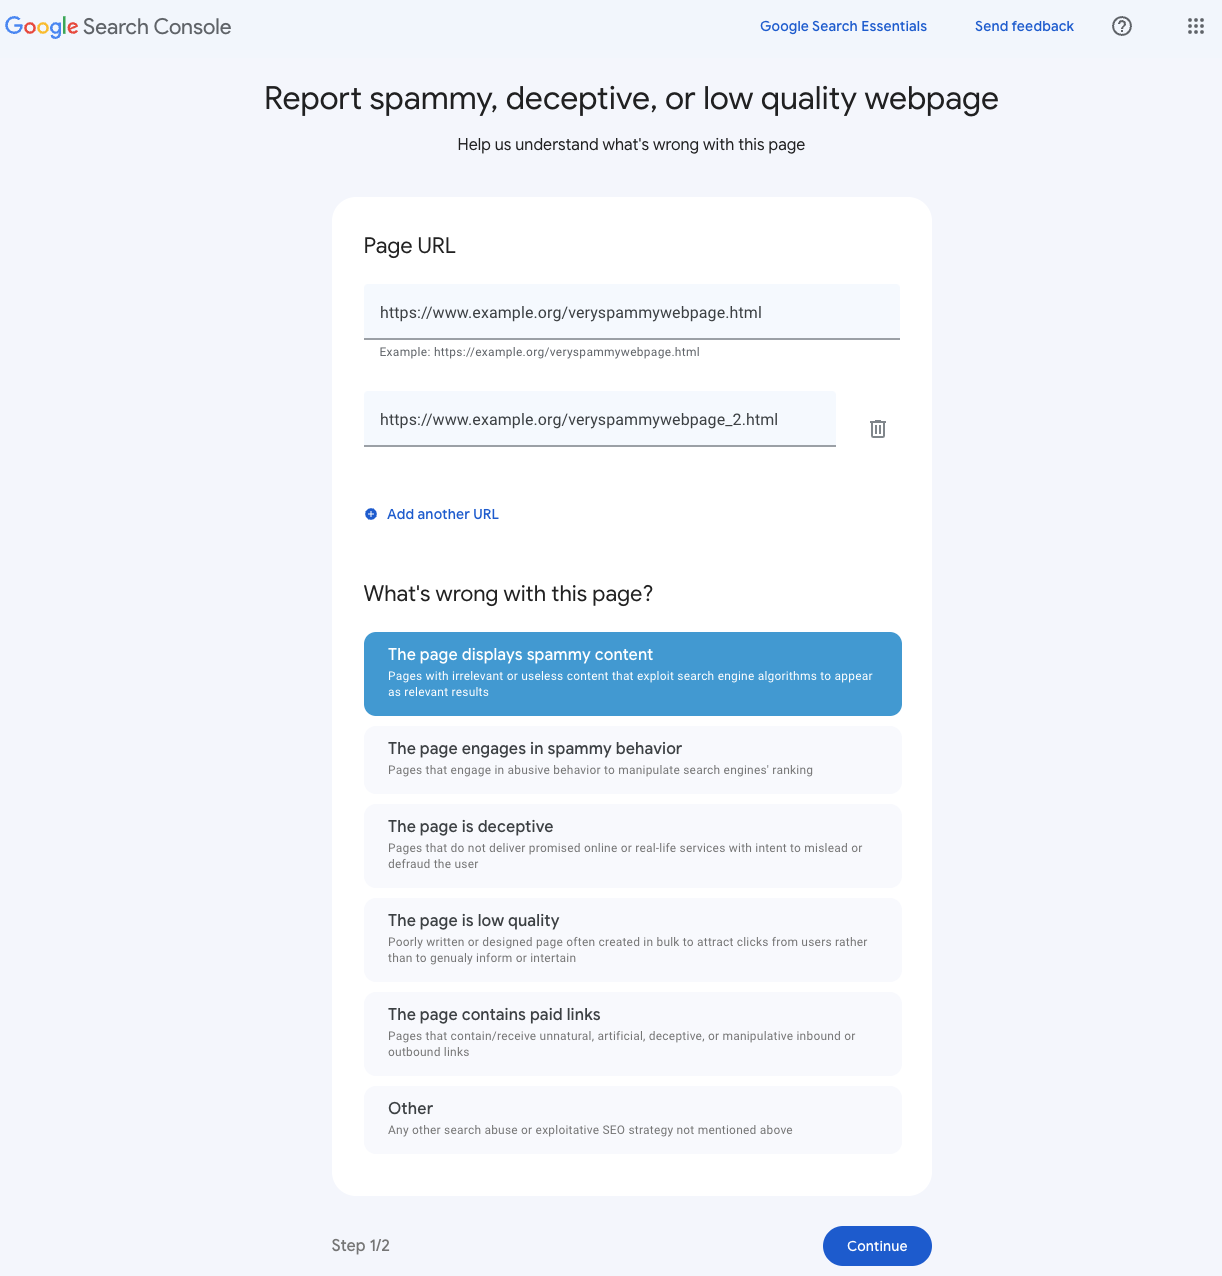 Google Aims To Improve Search Quality With New Feedback Form